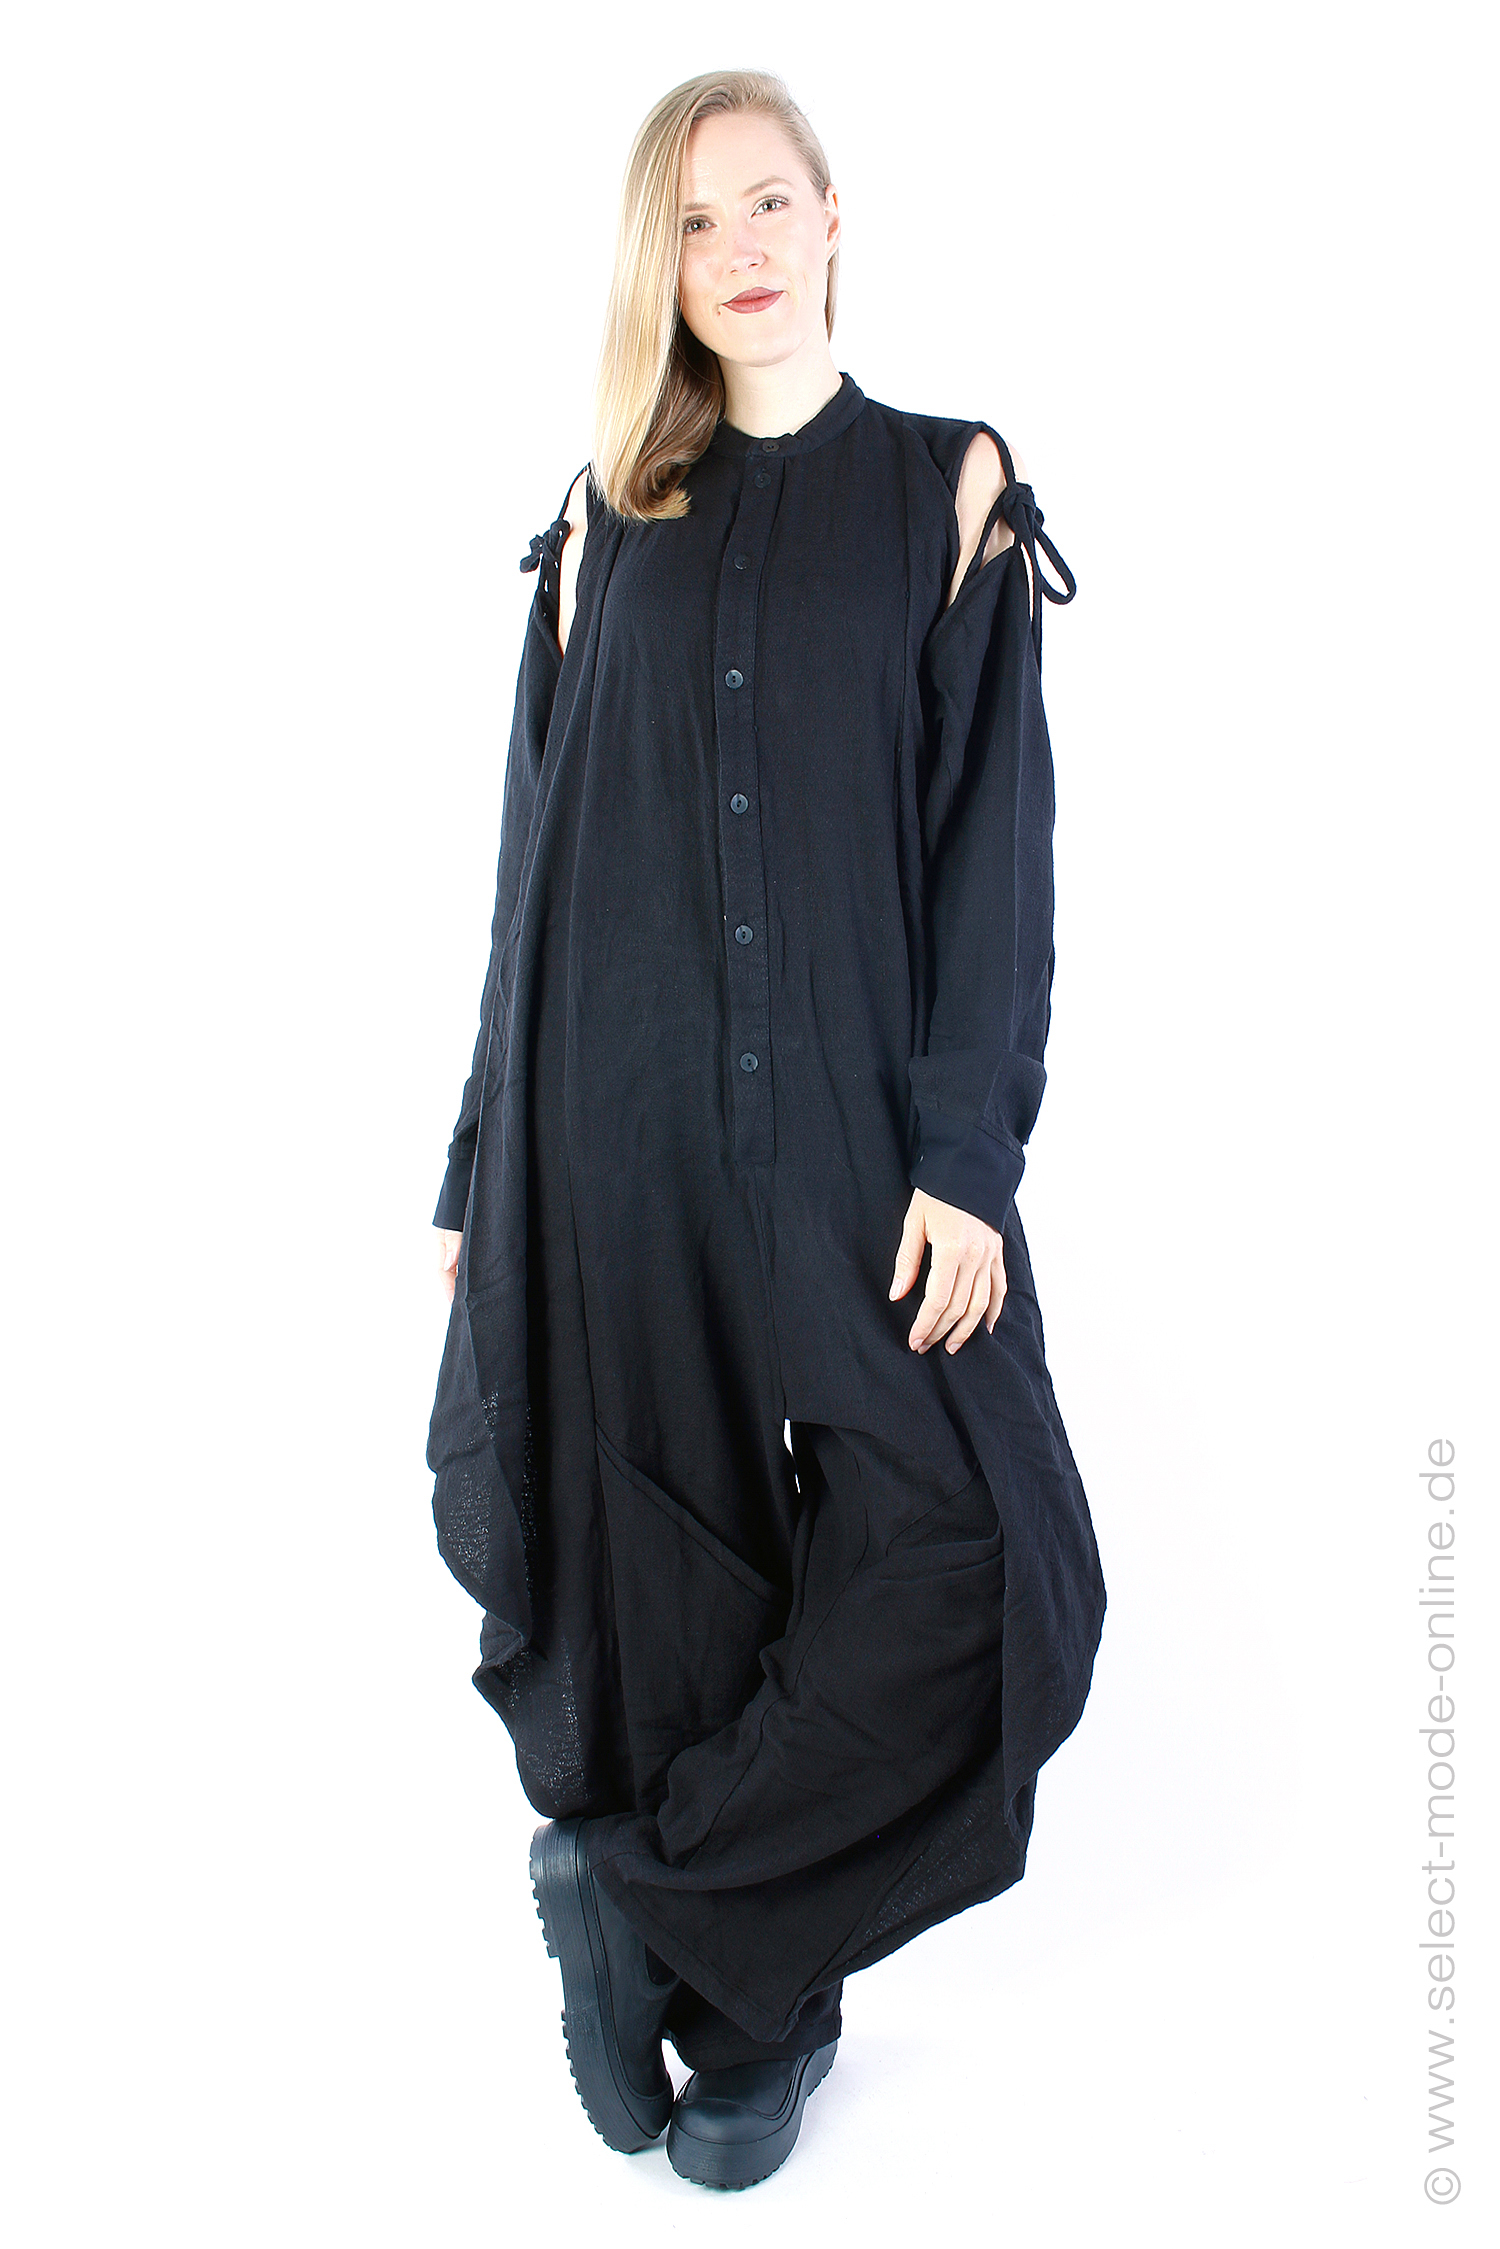 Cahngeable jumpsuit - black - ID020101